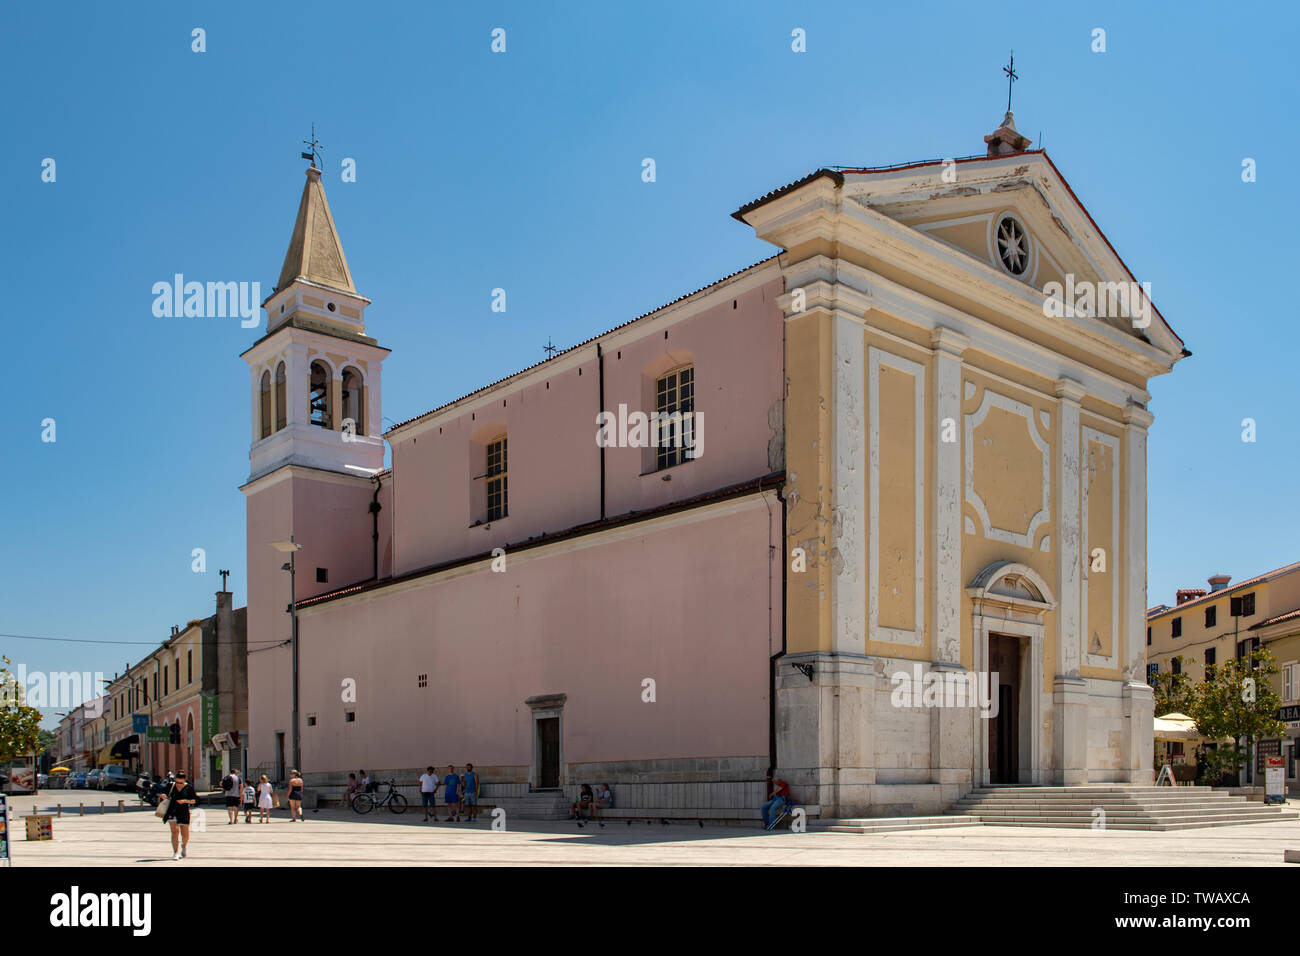 Church of Our Lady of Angels, Porec, Croatia Stock Photo